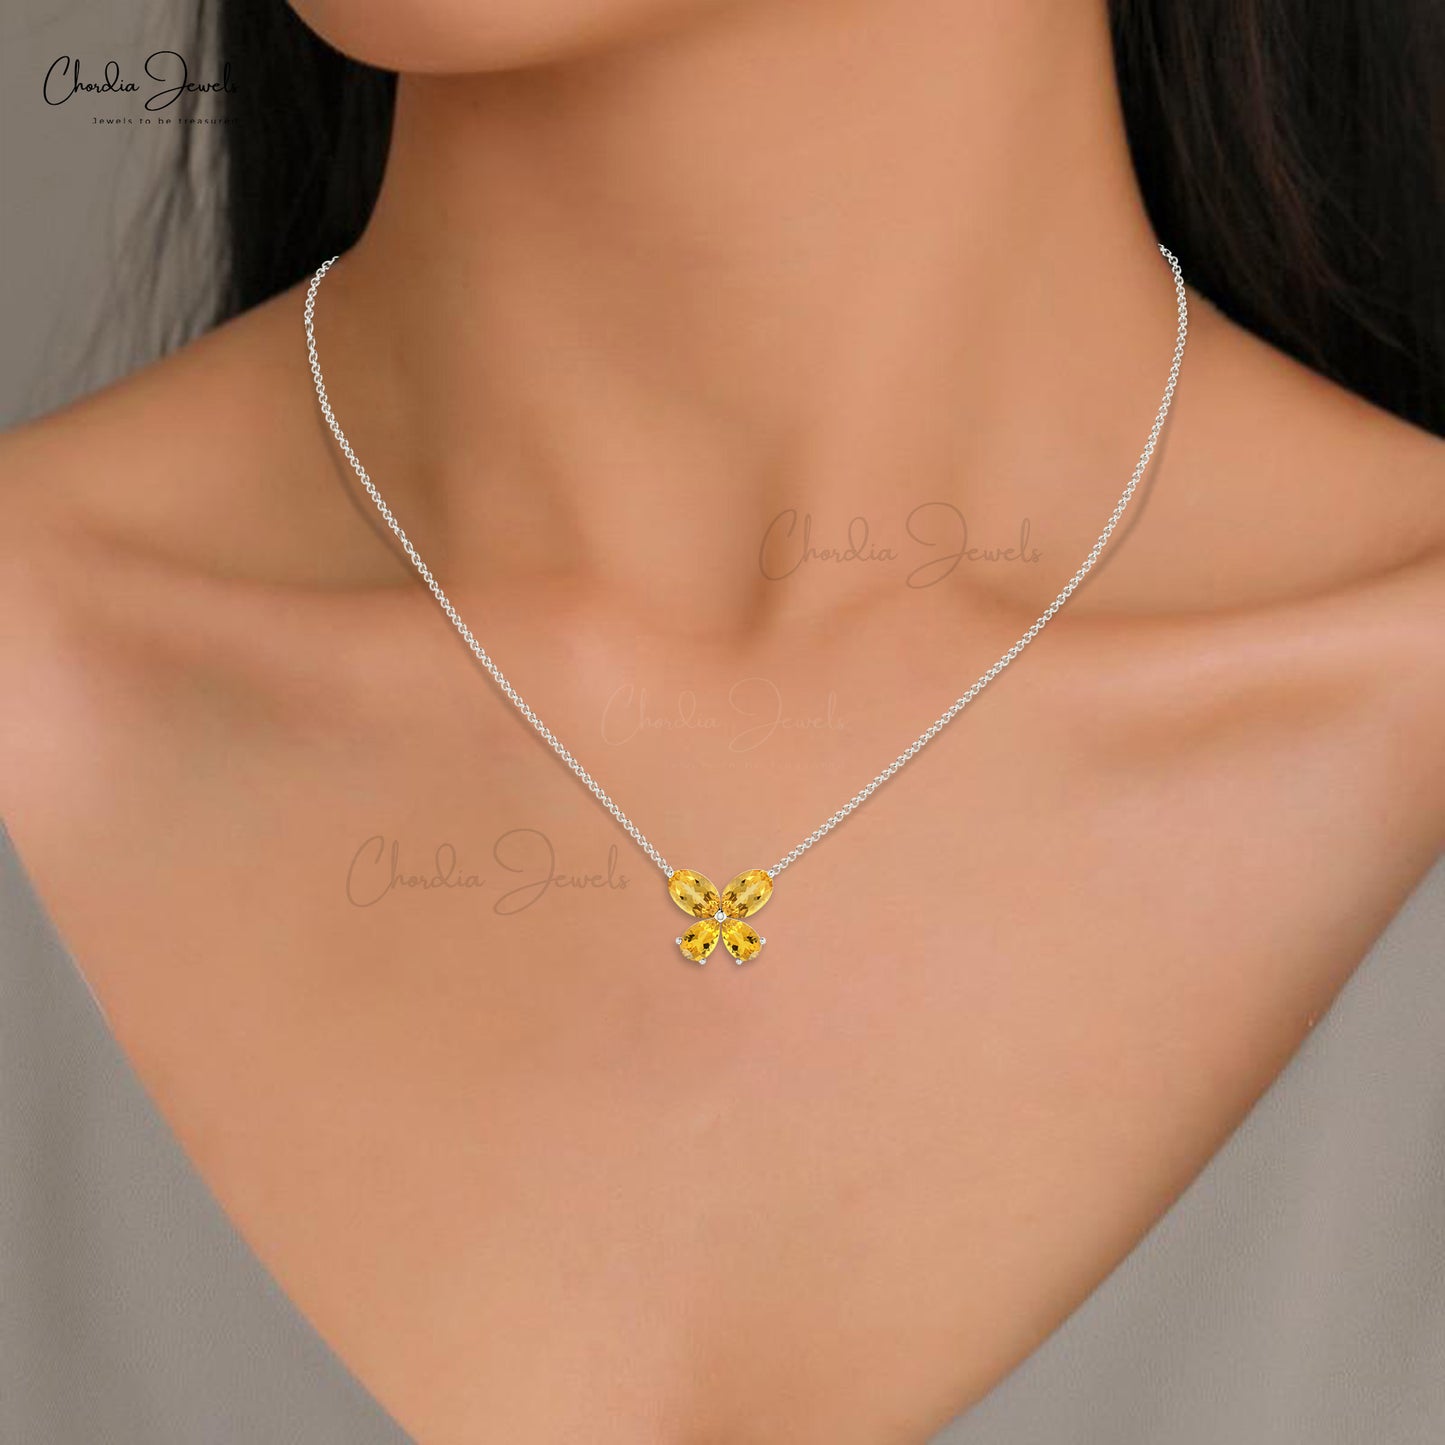 Load image into Gallery viewer, Elegant Trendy Oval Shape Natural Yellow Citrine Gemstone Butterfly Necklace Pendant 14k Pure Gold Necklace Minimalist Jewelry For Women
